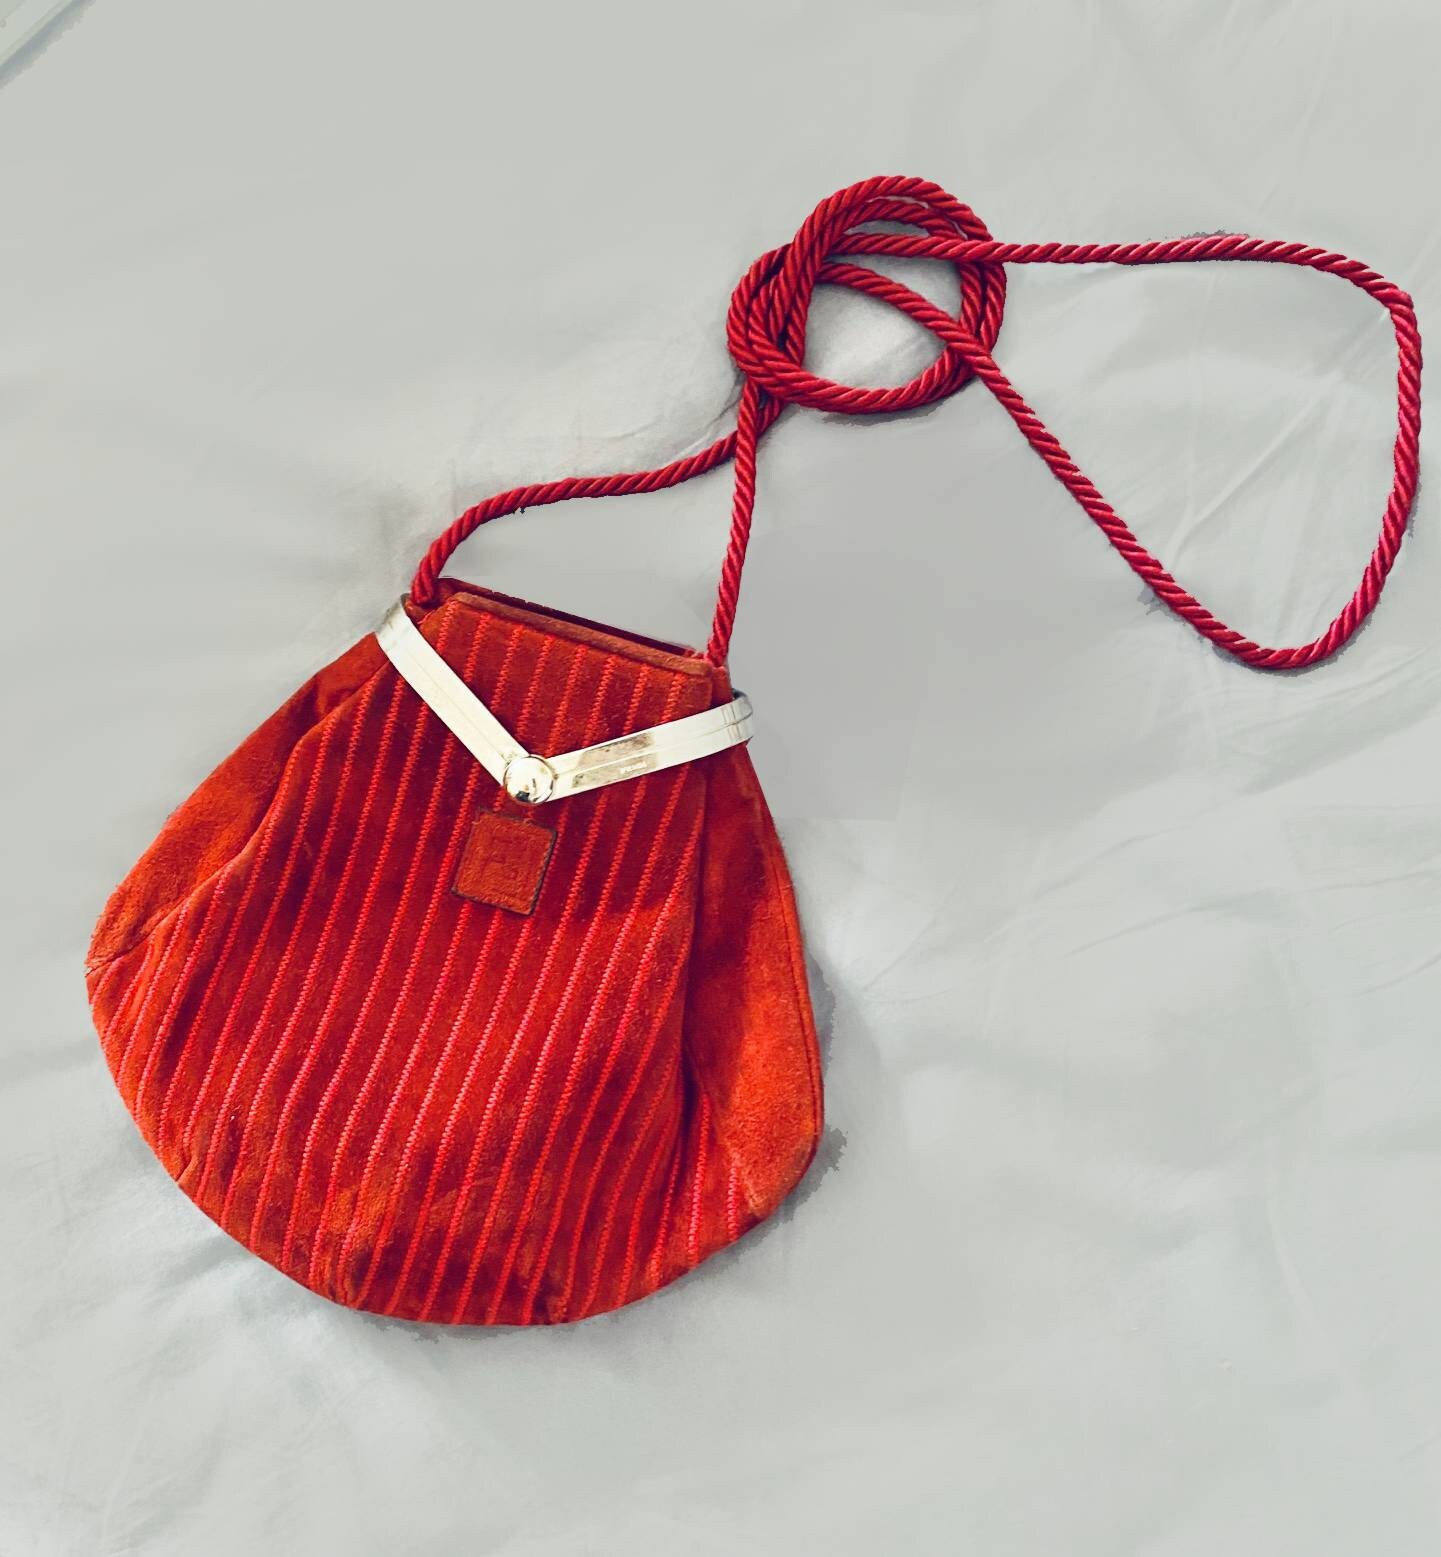 1980s Fendi Red Suede Metal Closure Pouch Bag – style - CHNGR